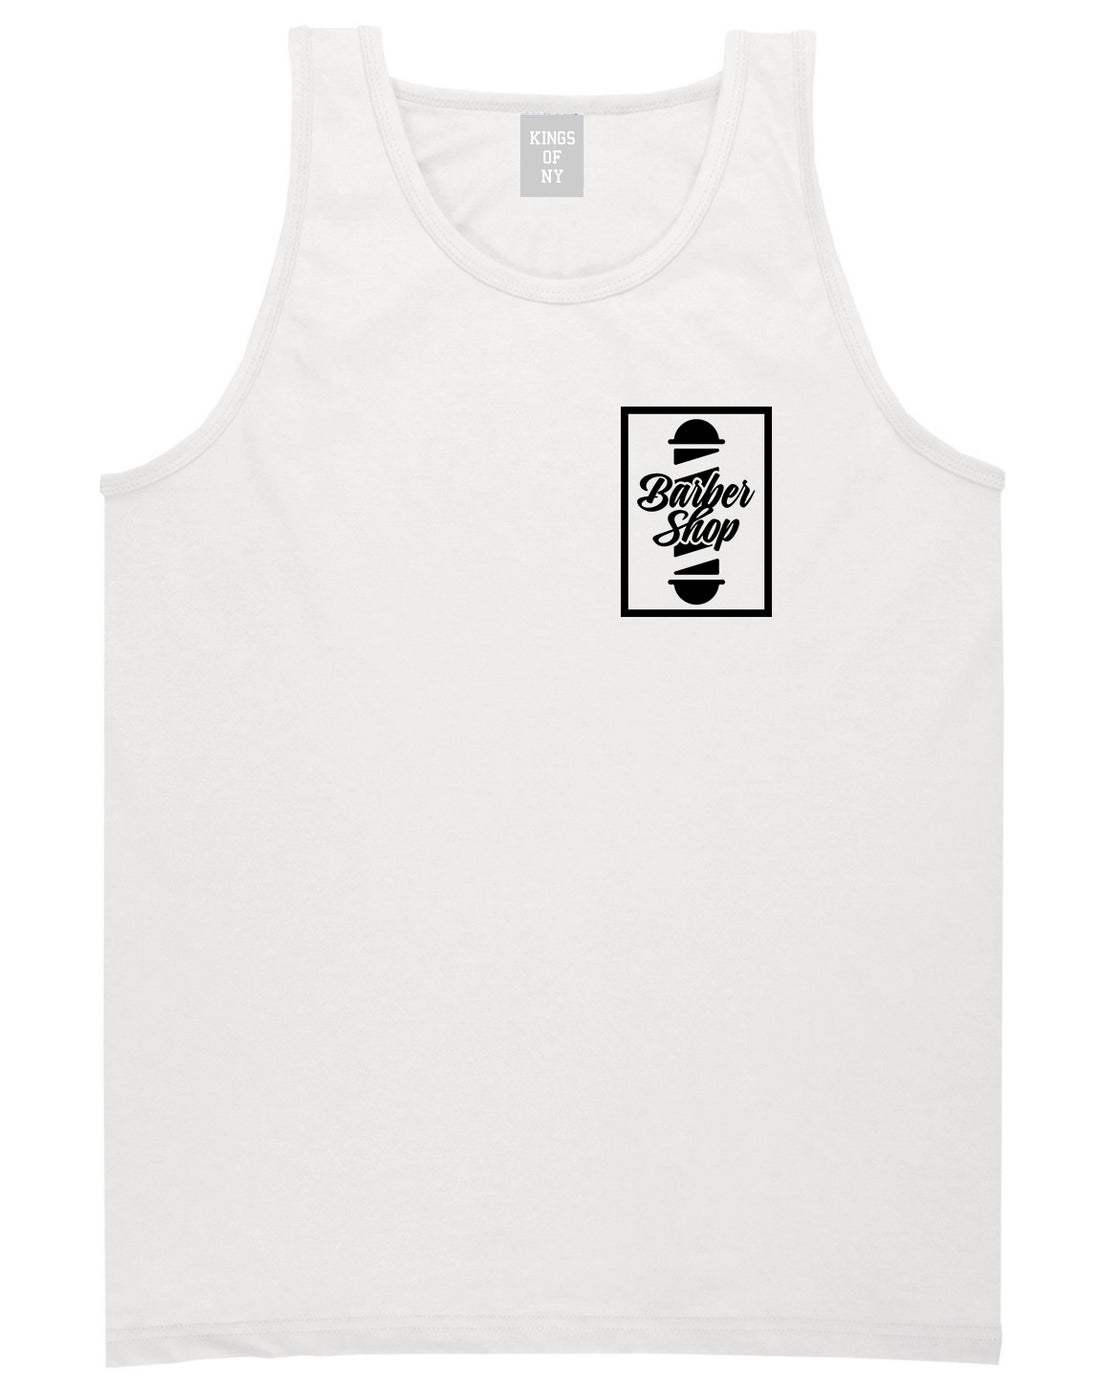 Barbershop Pole Chest White Tank Top Shirt by Kings Of NY